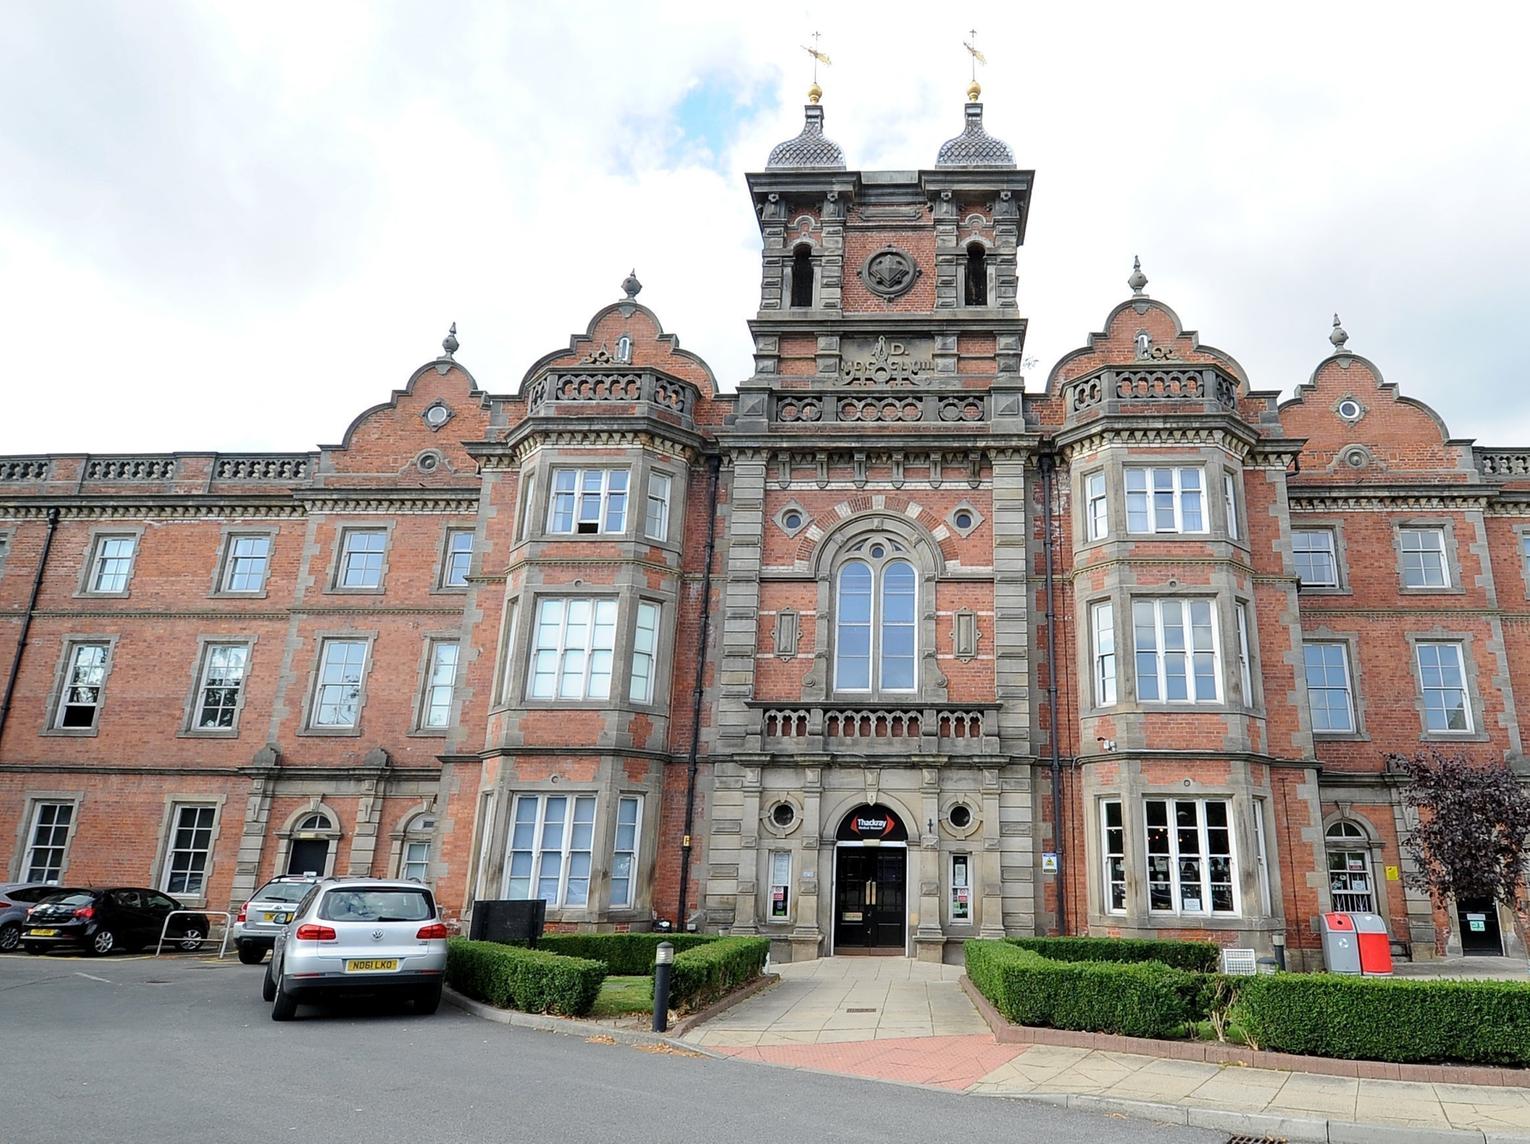 Said to be one of the most haunted places in Leeds, the building was once a workhouse and then Leeds Asylum. There have been many ghostly sightings, particularly of a man in a white coat and a woman seen in a top window.